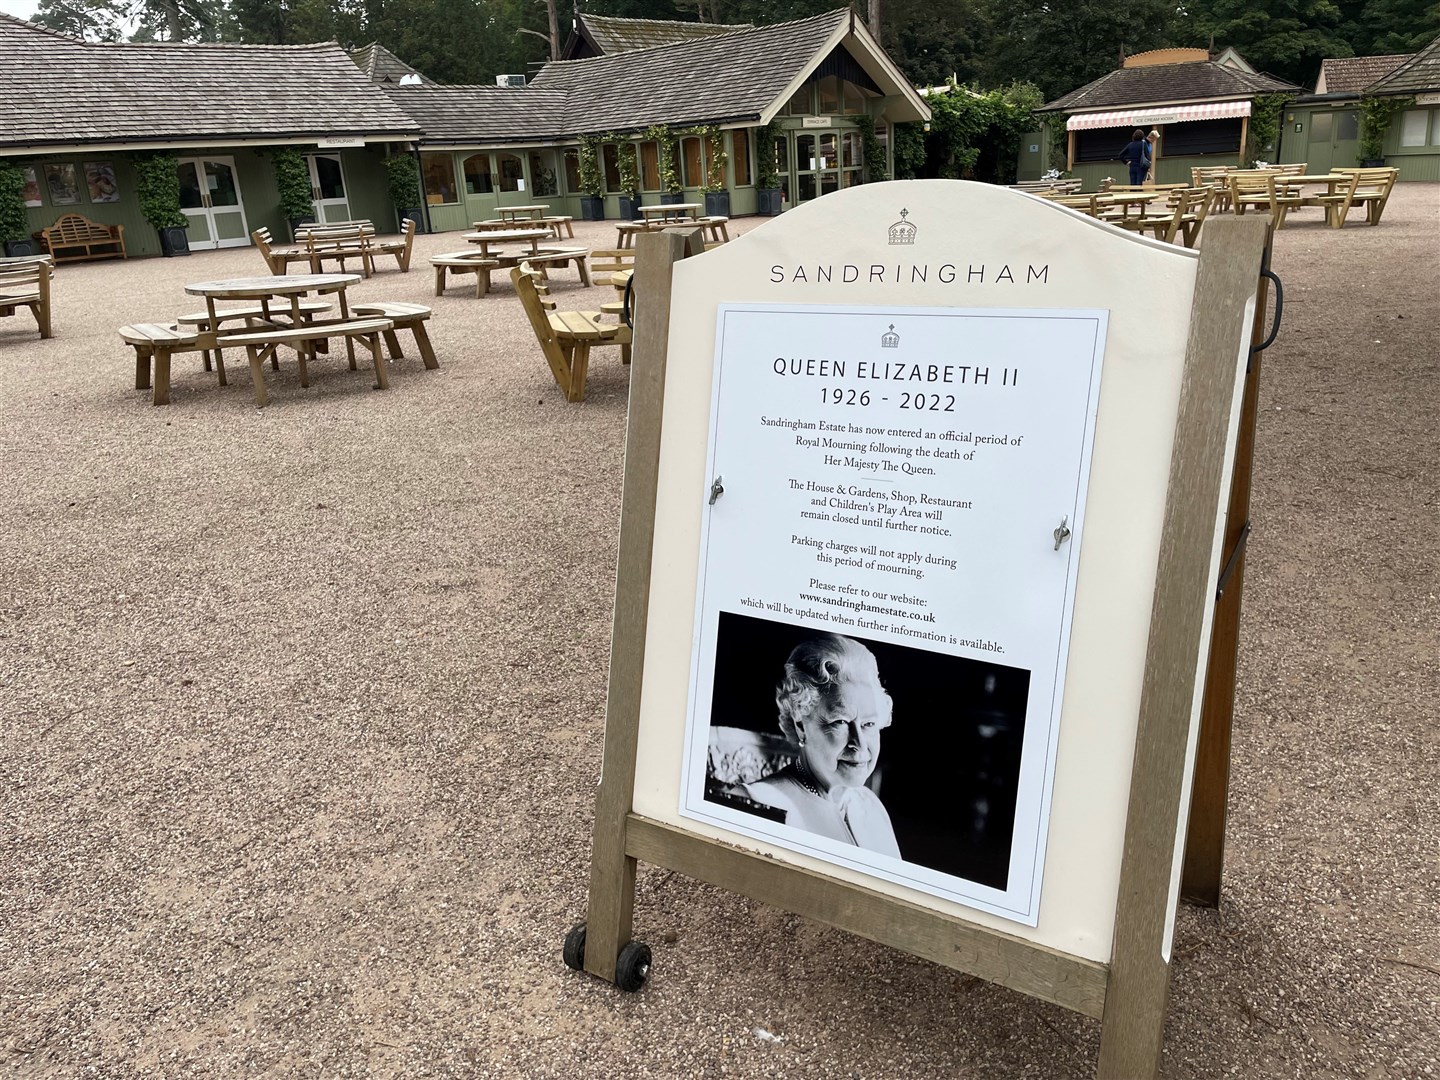 Notices outside the Sandringham visitor centre inform people that the estate is in an official period of royal mourning (Sam Russell/ PA)